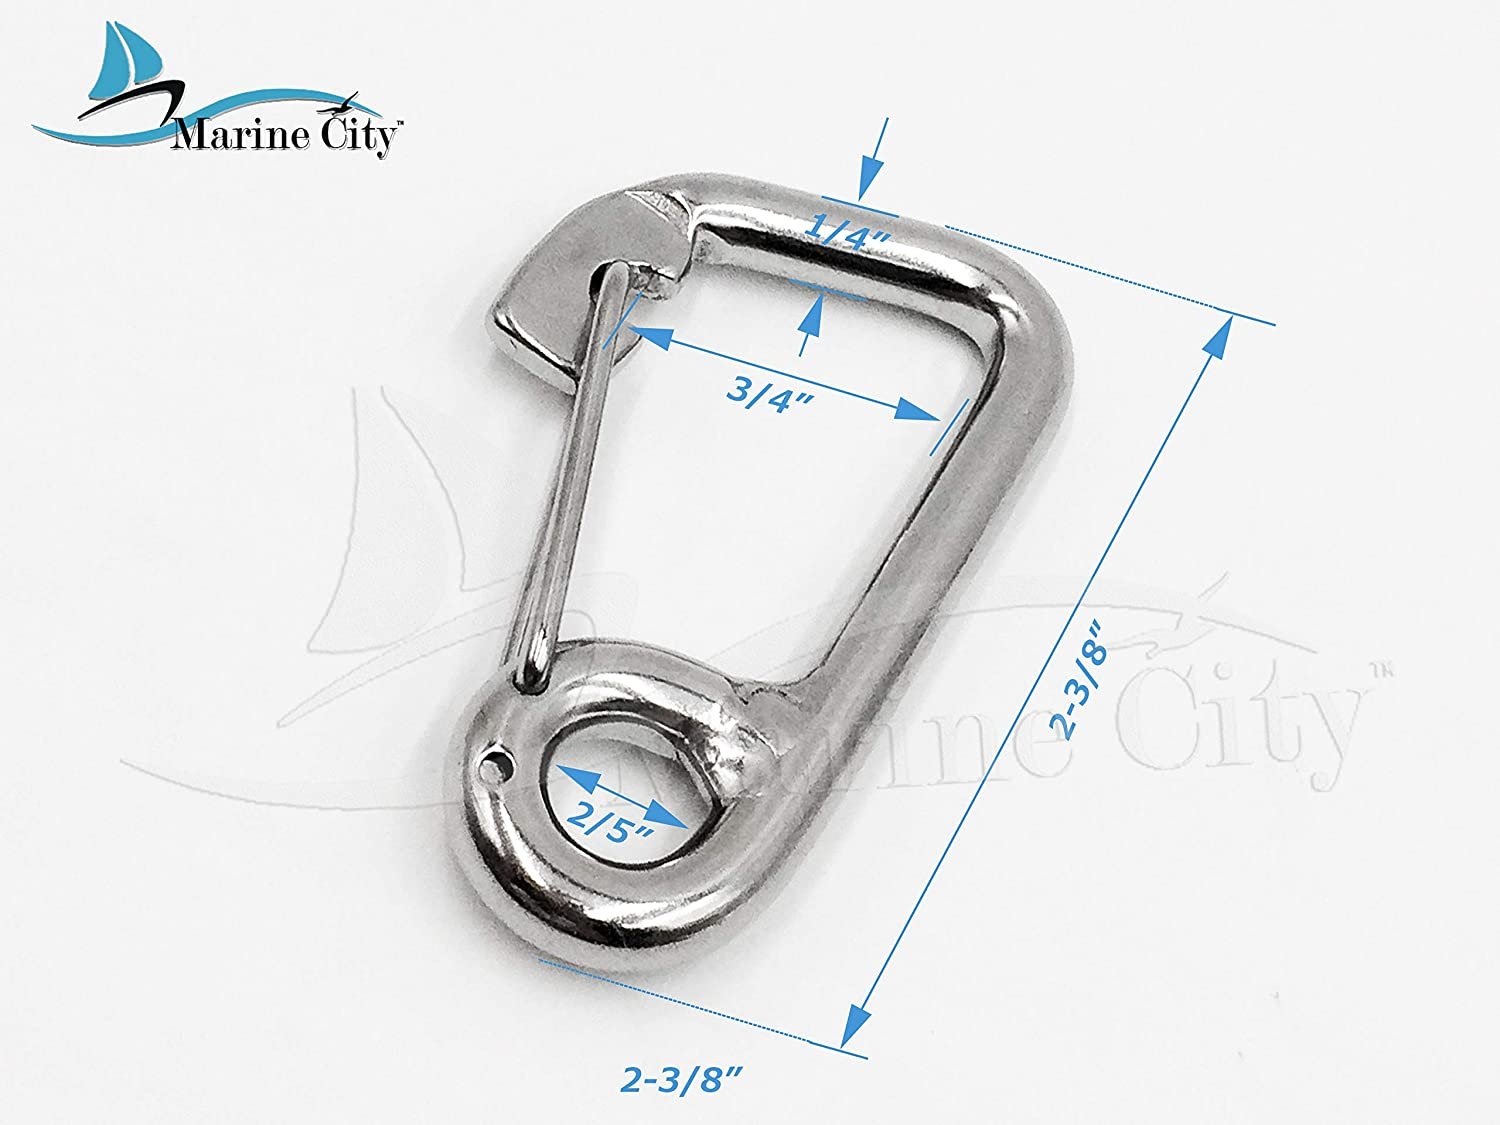 Marine City 316 Marine Grade Stainless Steel Carabiner Spring Snap Hook Boat C:2-3/8 inches - image 1 of 9